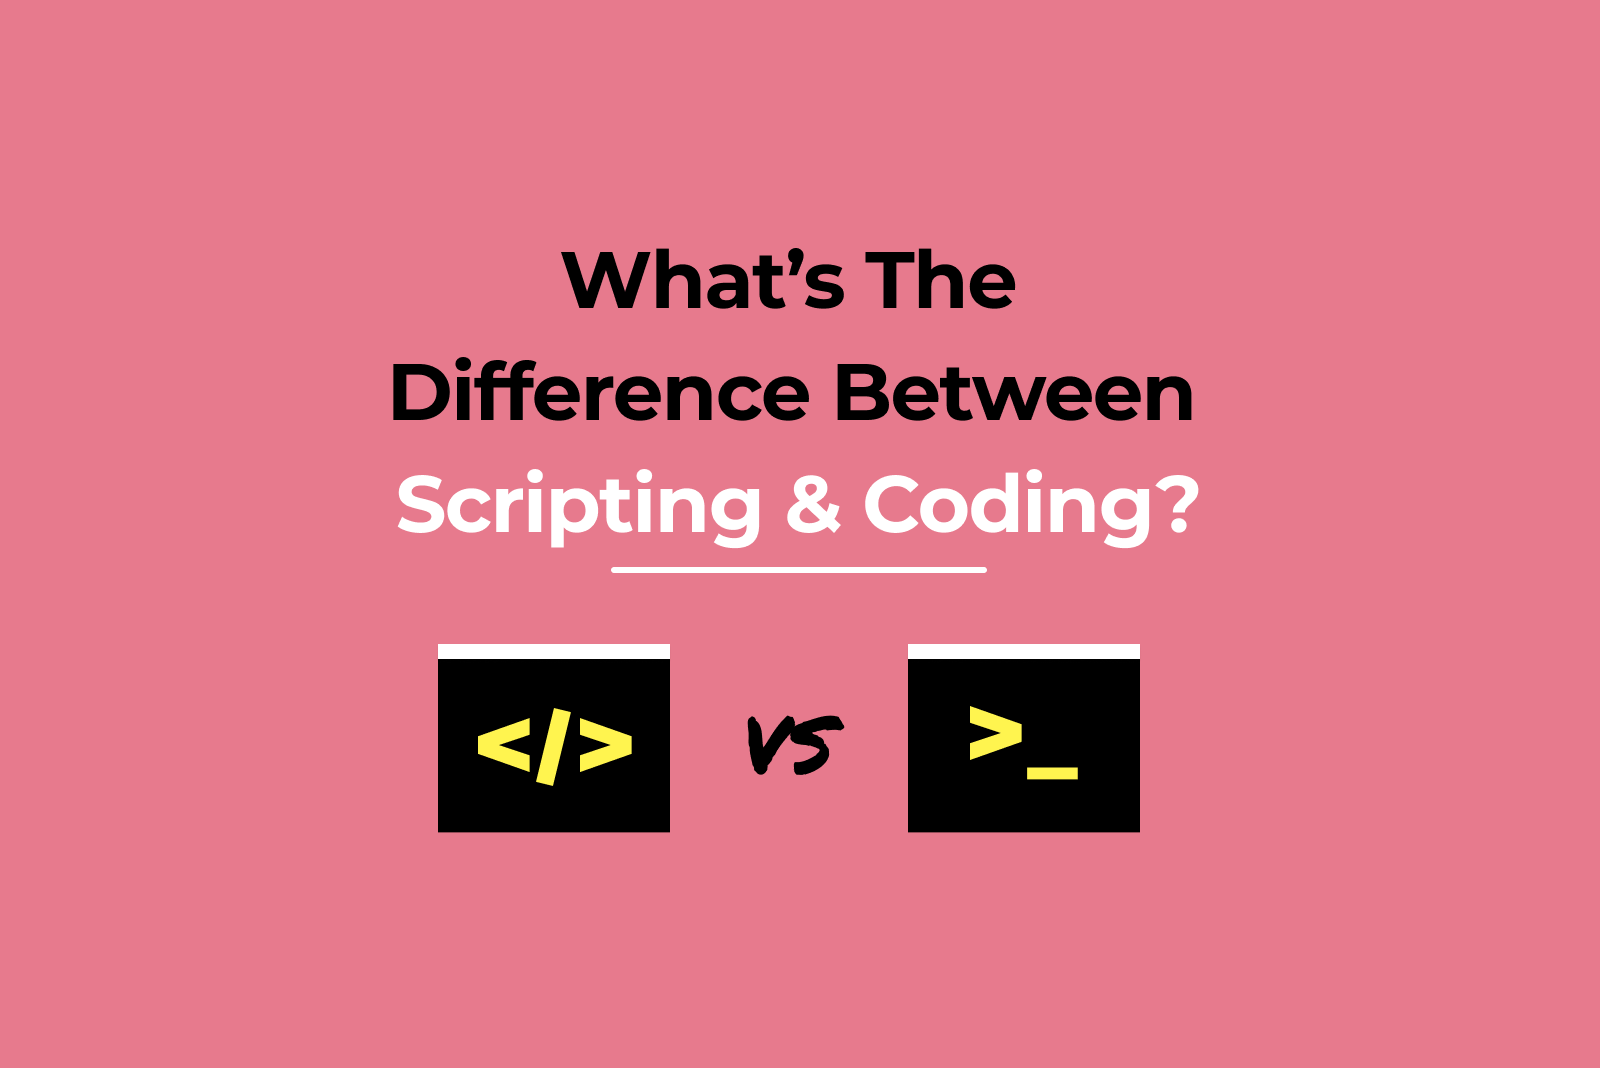 What's the difference between Scripting & Coding?